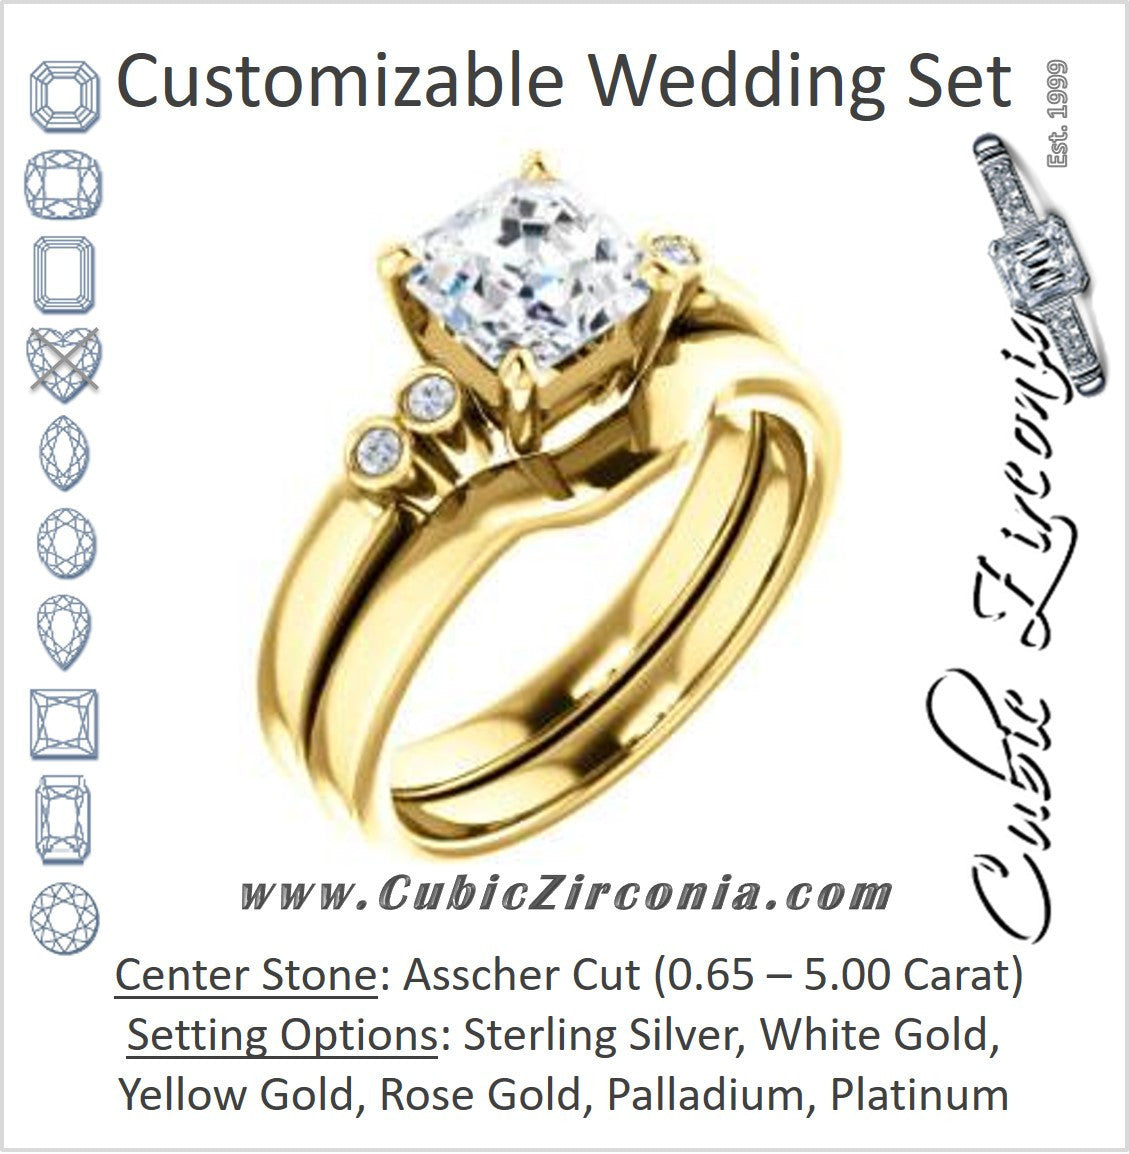 CZ Wedding Set, featuring The Luzella engagement ring (Customizable 5-stone Design with Asscher Cut Center and Round Bezel Accents)